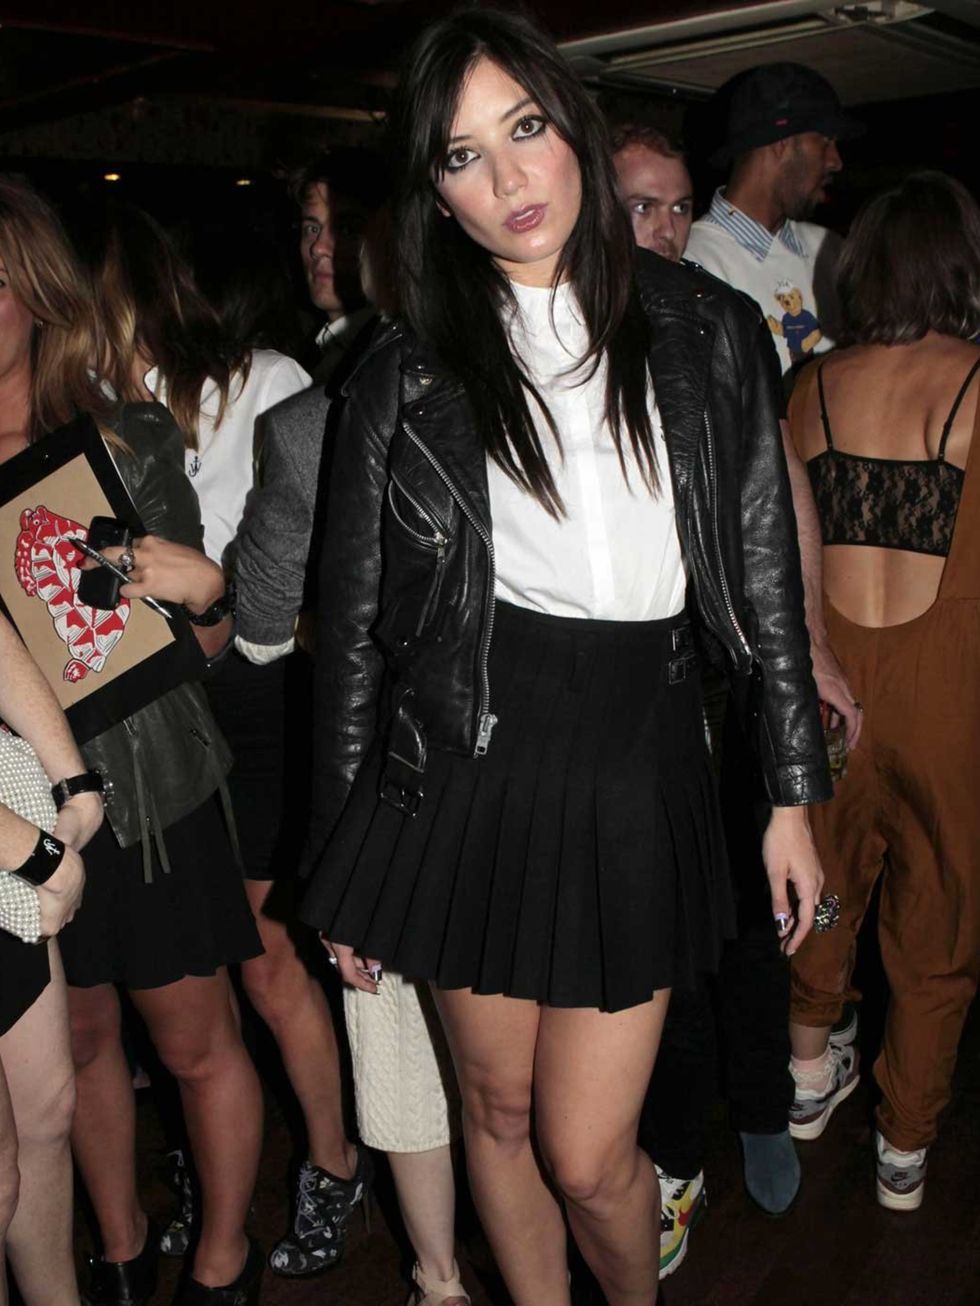 <p>Daisy Lowe wearing a <a href="http://www.elleuk.com/fashion/in-store-now/in-store-today-j.w.-anderson-x-topshop">JW Anderson X Topshop</a> shirt and kilt and her signature biker jacket at the JW Anderson and Topshop party.</p>